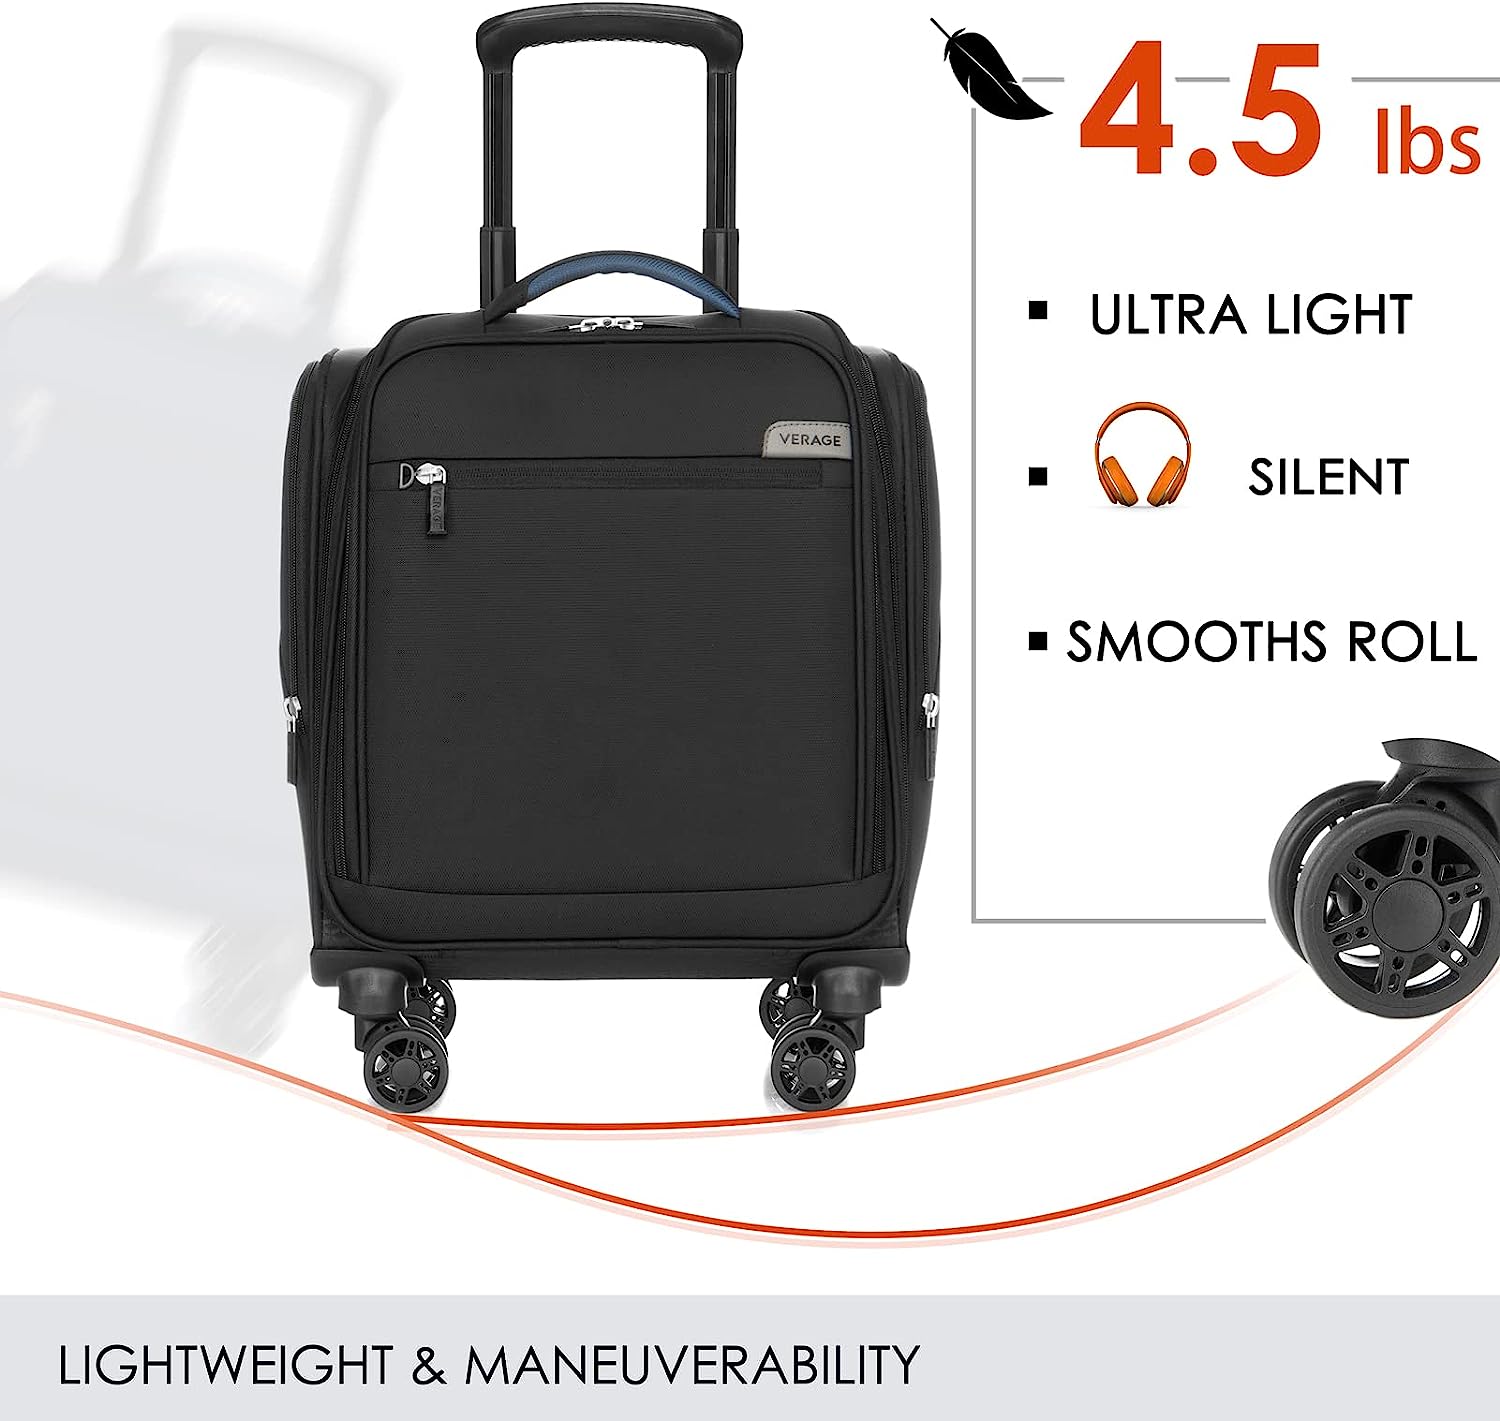 Carry On Underseat Luggage with Wheels & USB Port, Wheeled Spinner Bag Carry-on Luggages for Airlines, Lightweight Suitcase Men Women, Pilots and Crew (14-Inch Compact)